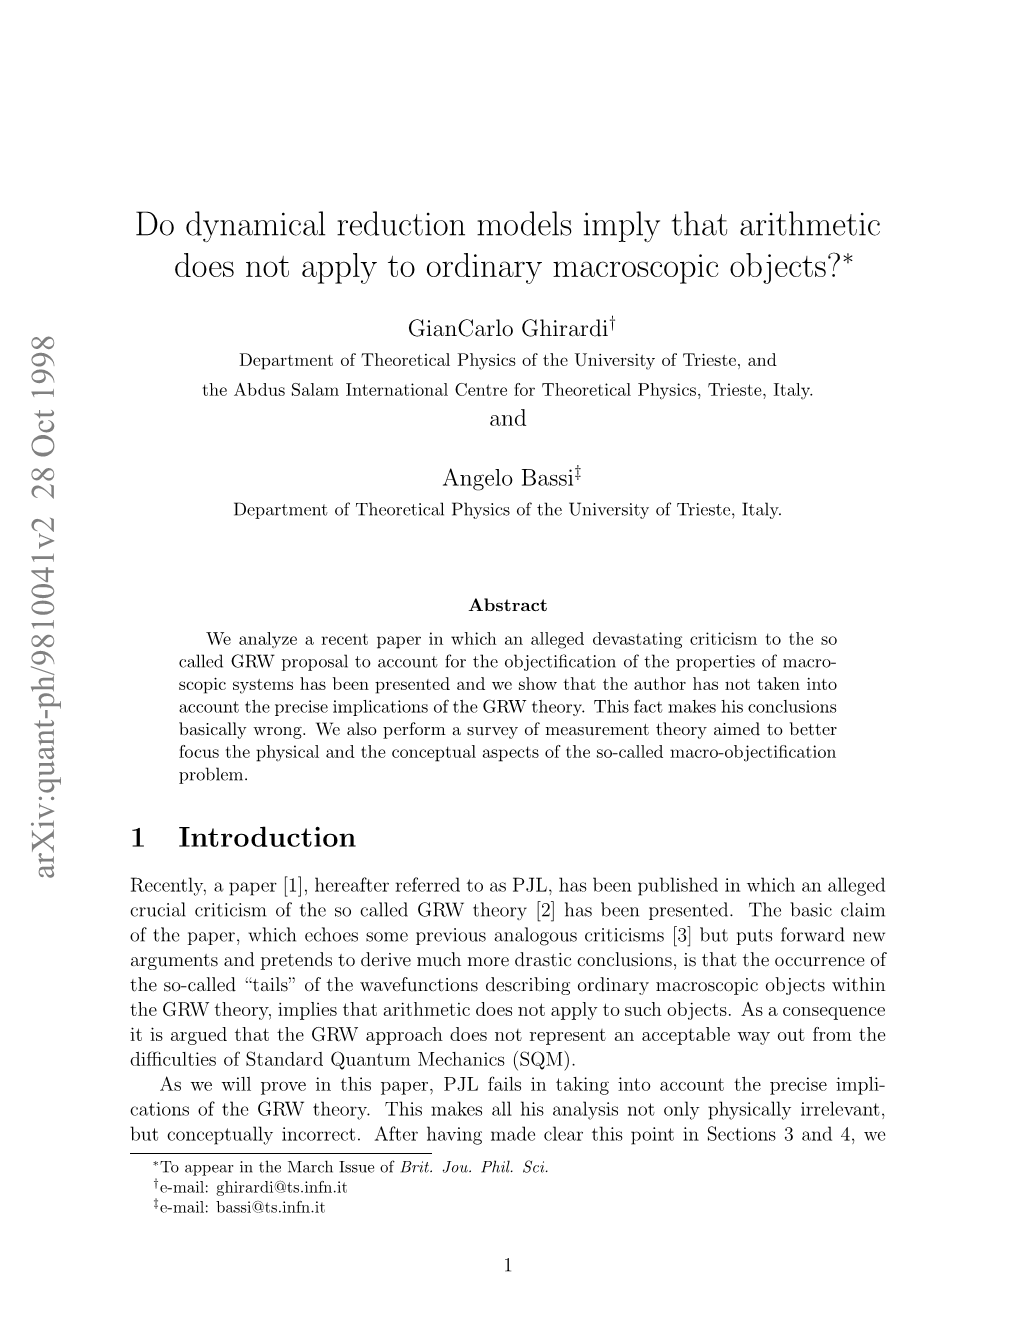 Do Dynamical Reduction Models Imply That Arithmetic Does Not Apply To